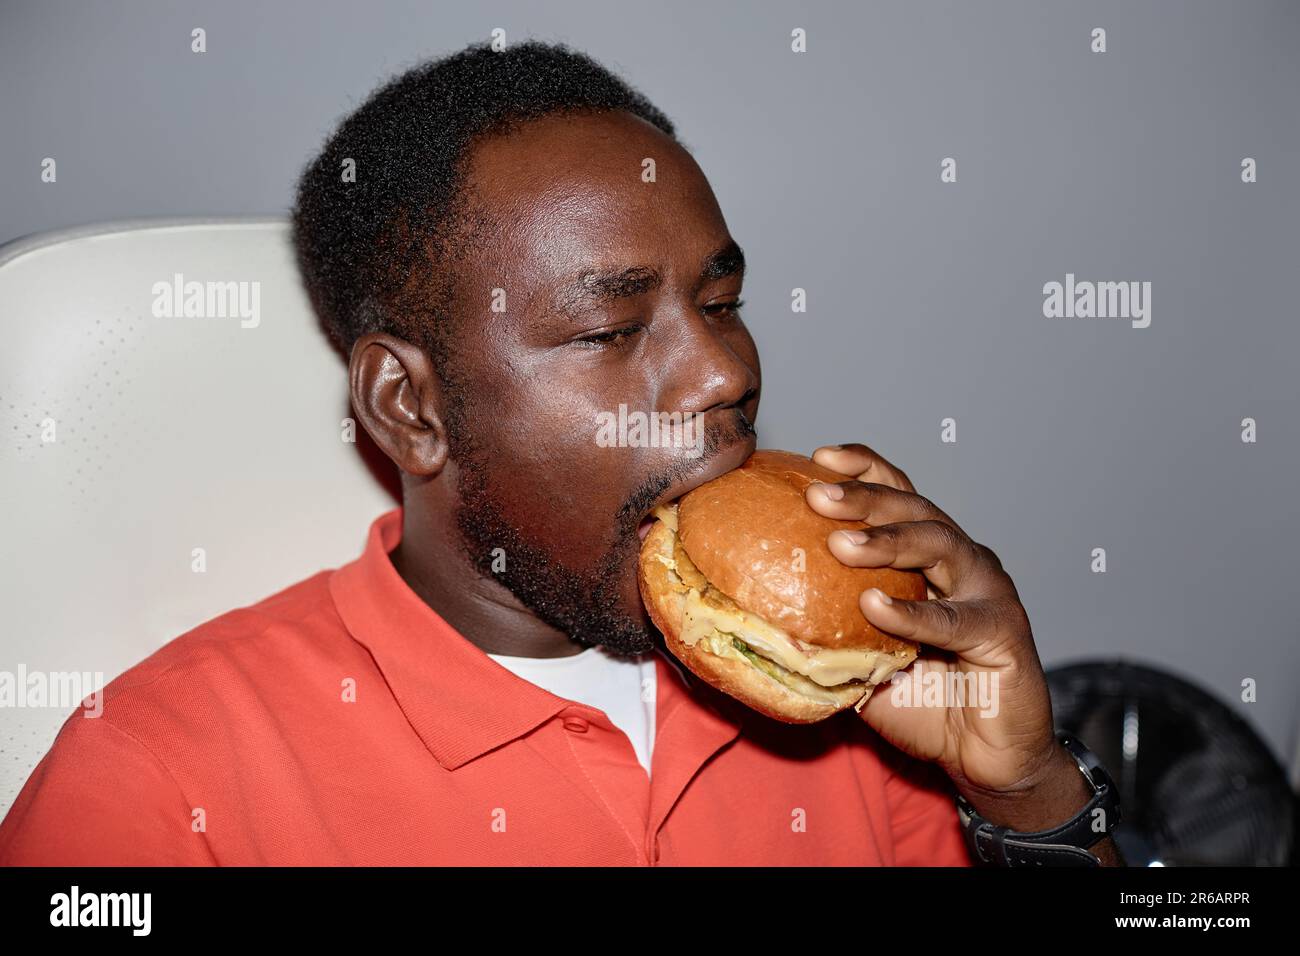 Minimal side view portrait of black man eating burger indoors shot with flash, copy space Stock Photo